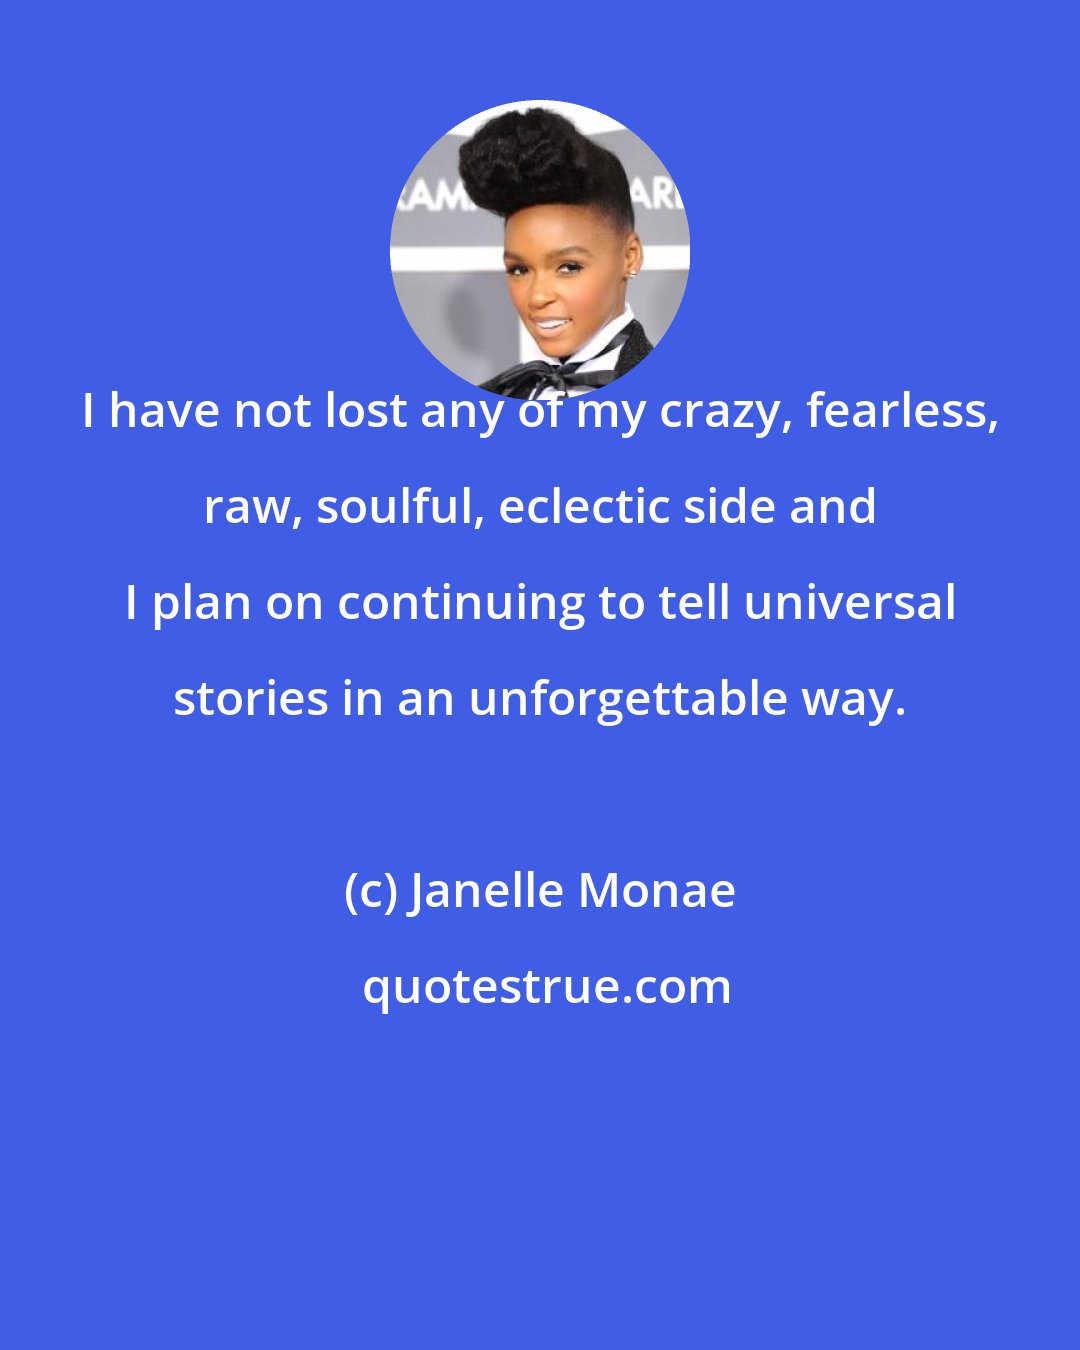 Janelle Monae: I have not lost any of my crazy, fearless, raw, soulful, eclectic side and I plan on continuing to tell universal stories in an unforgettable way.